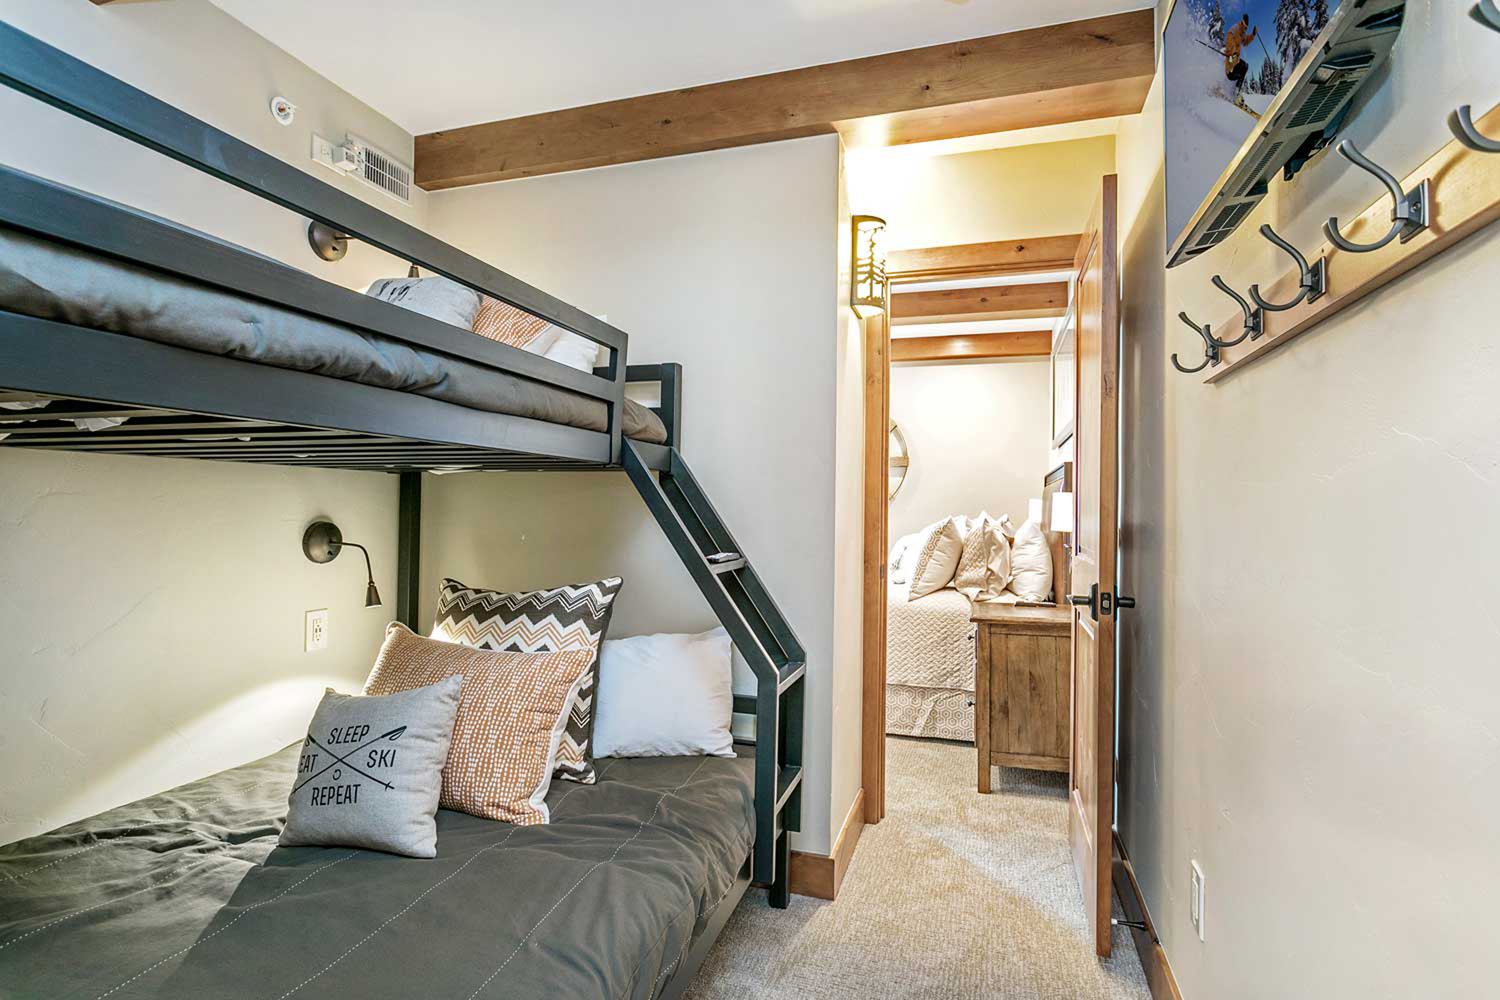 Antlers at Vail hotel’s new “Chill Out” package offers families a complimentary upgrade to a one-bedroom condo with separate bunkbed room for family comfort with a great price.